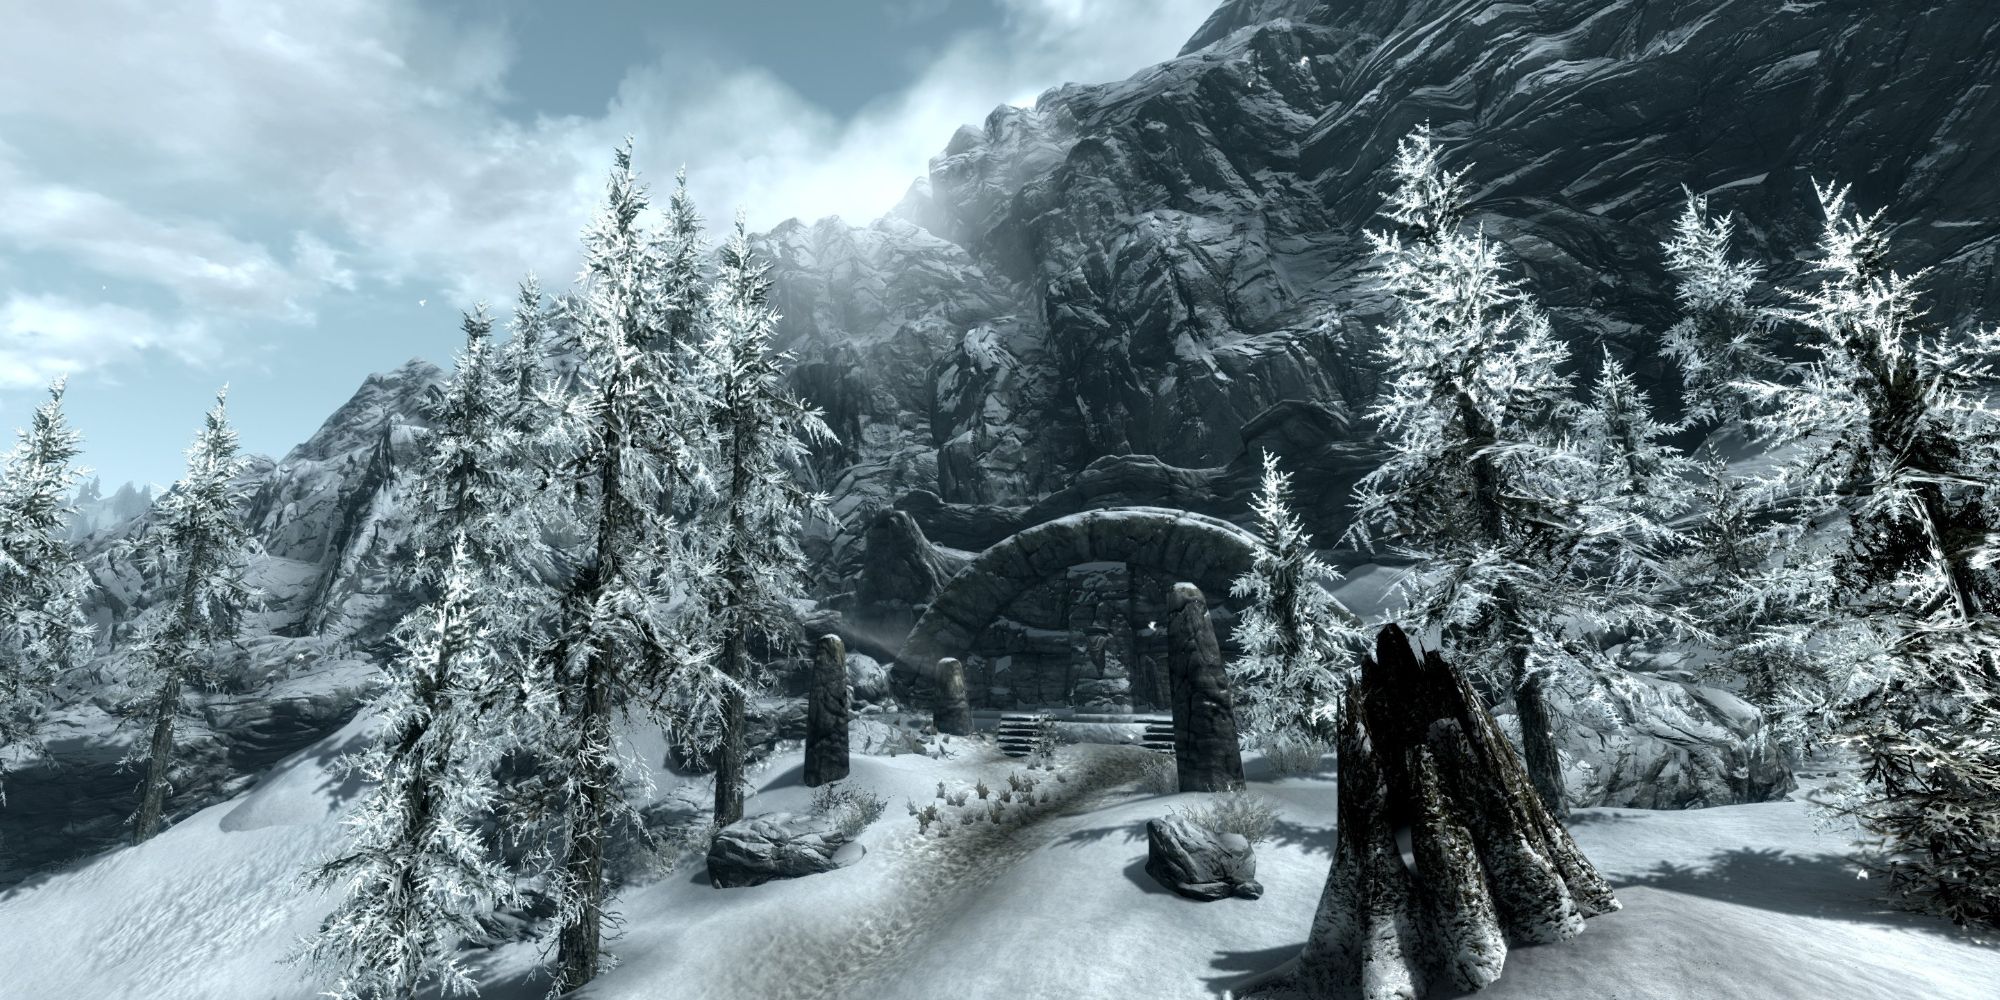 A screenshot of a snowy environment from the Elder Scrolls - Skyrim game